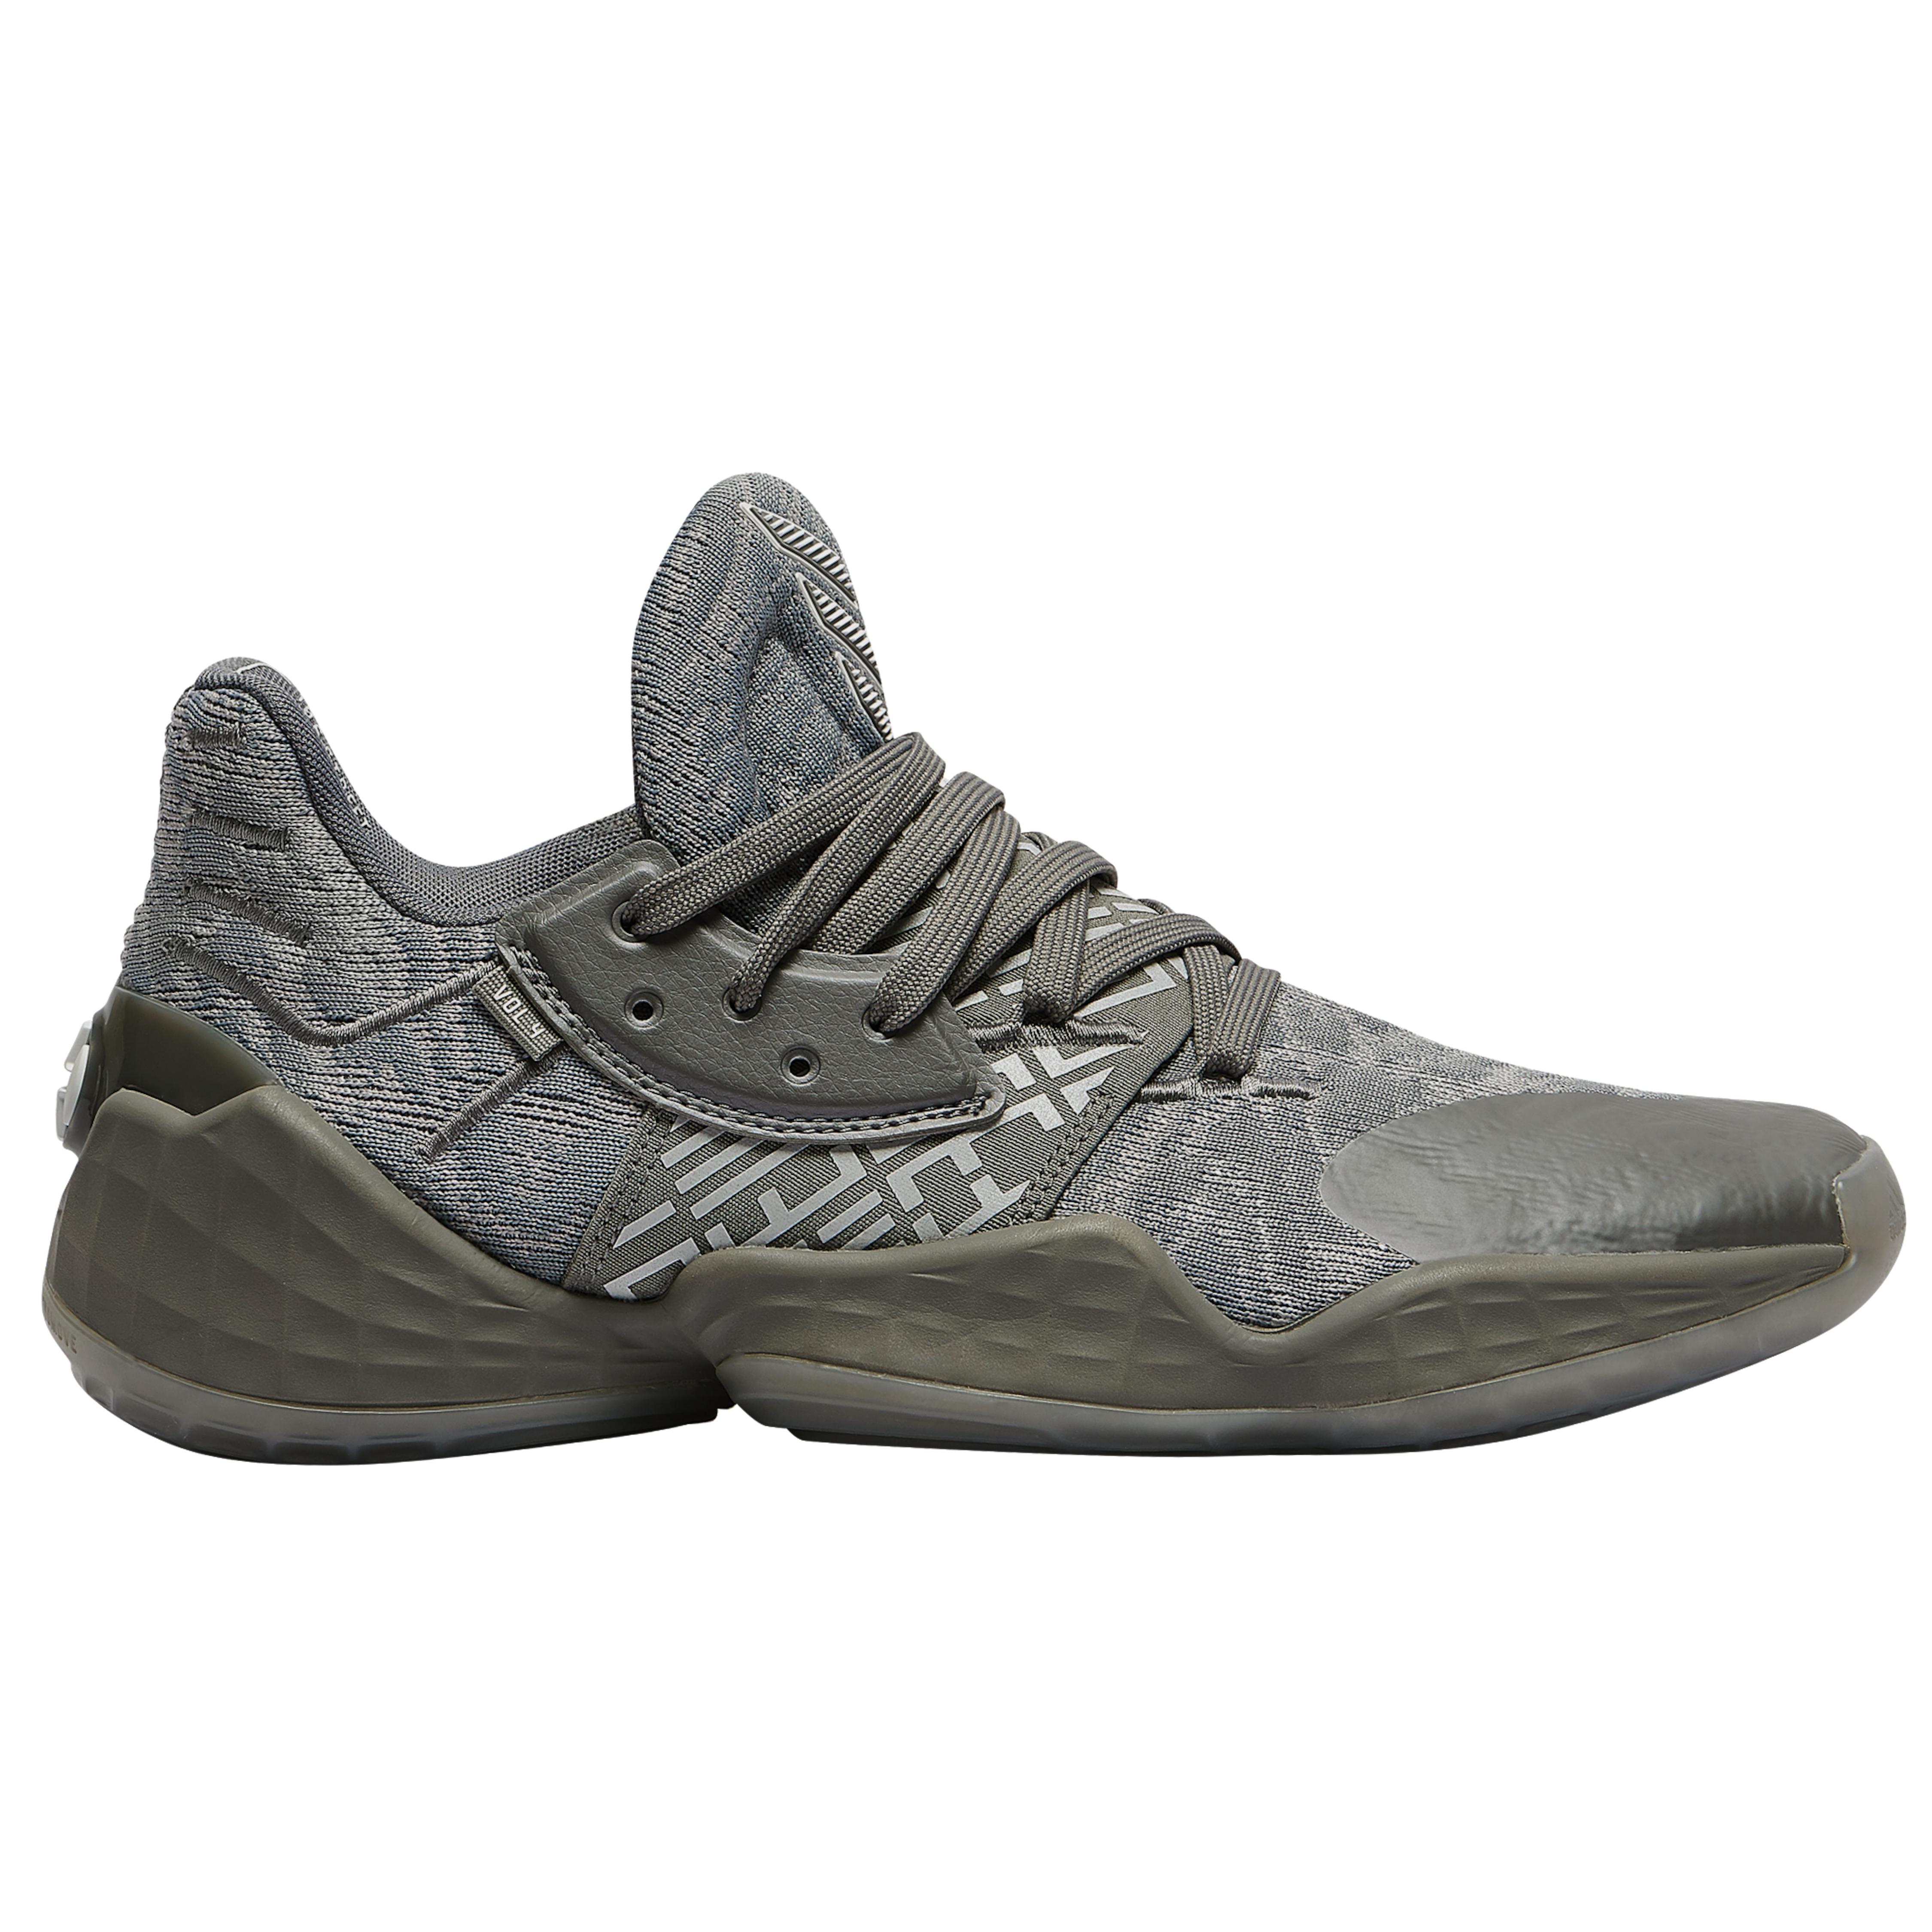 adidas Rubber Harden Vol. 4 in Grey/White/Grey (Gray) for Men - Lyst